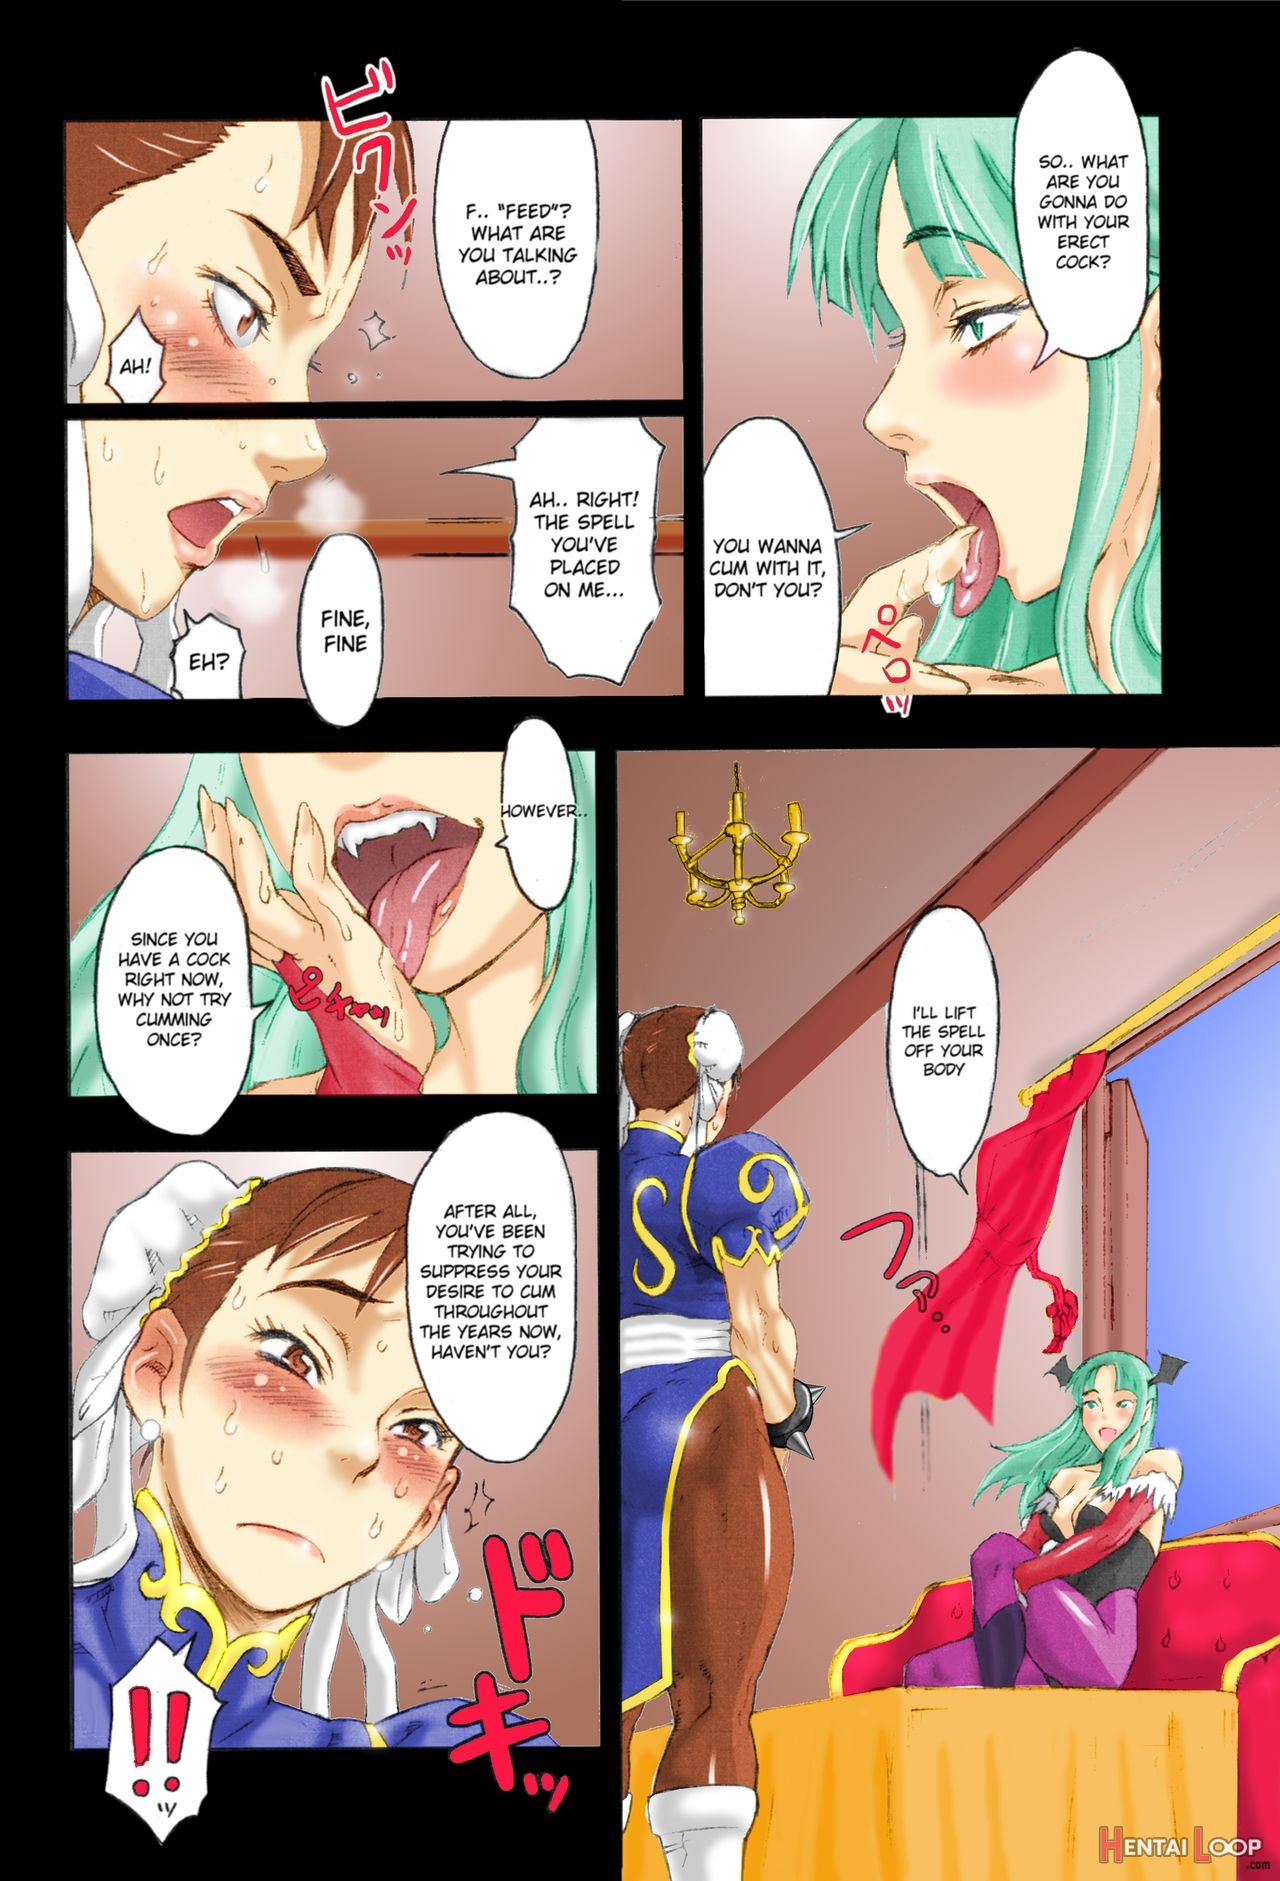 Nippon Onna Heroine 2 – Colorized page 9